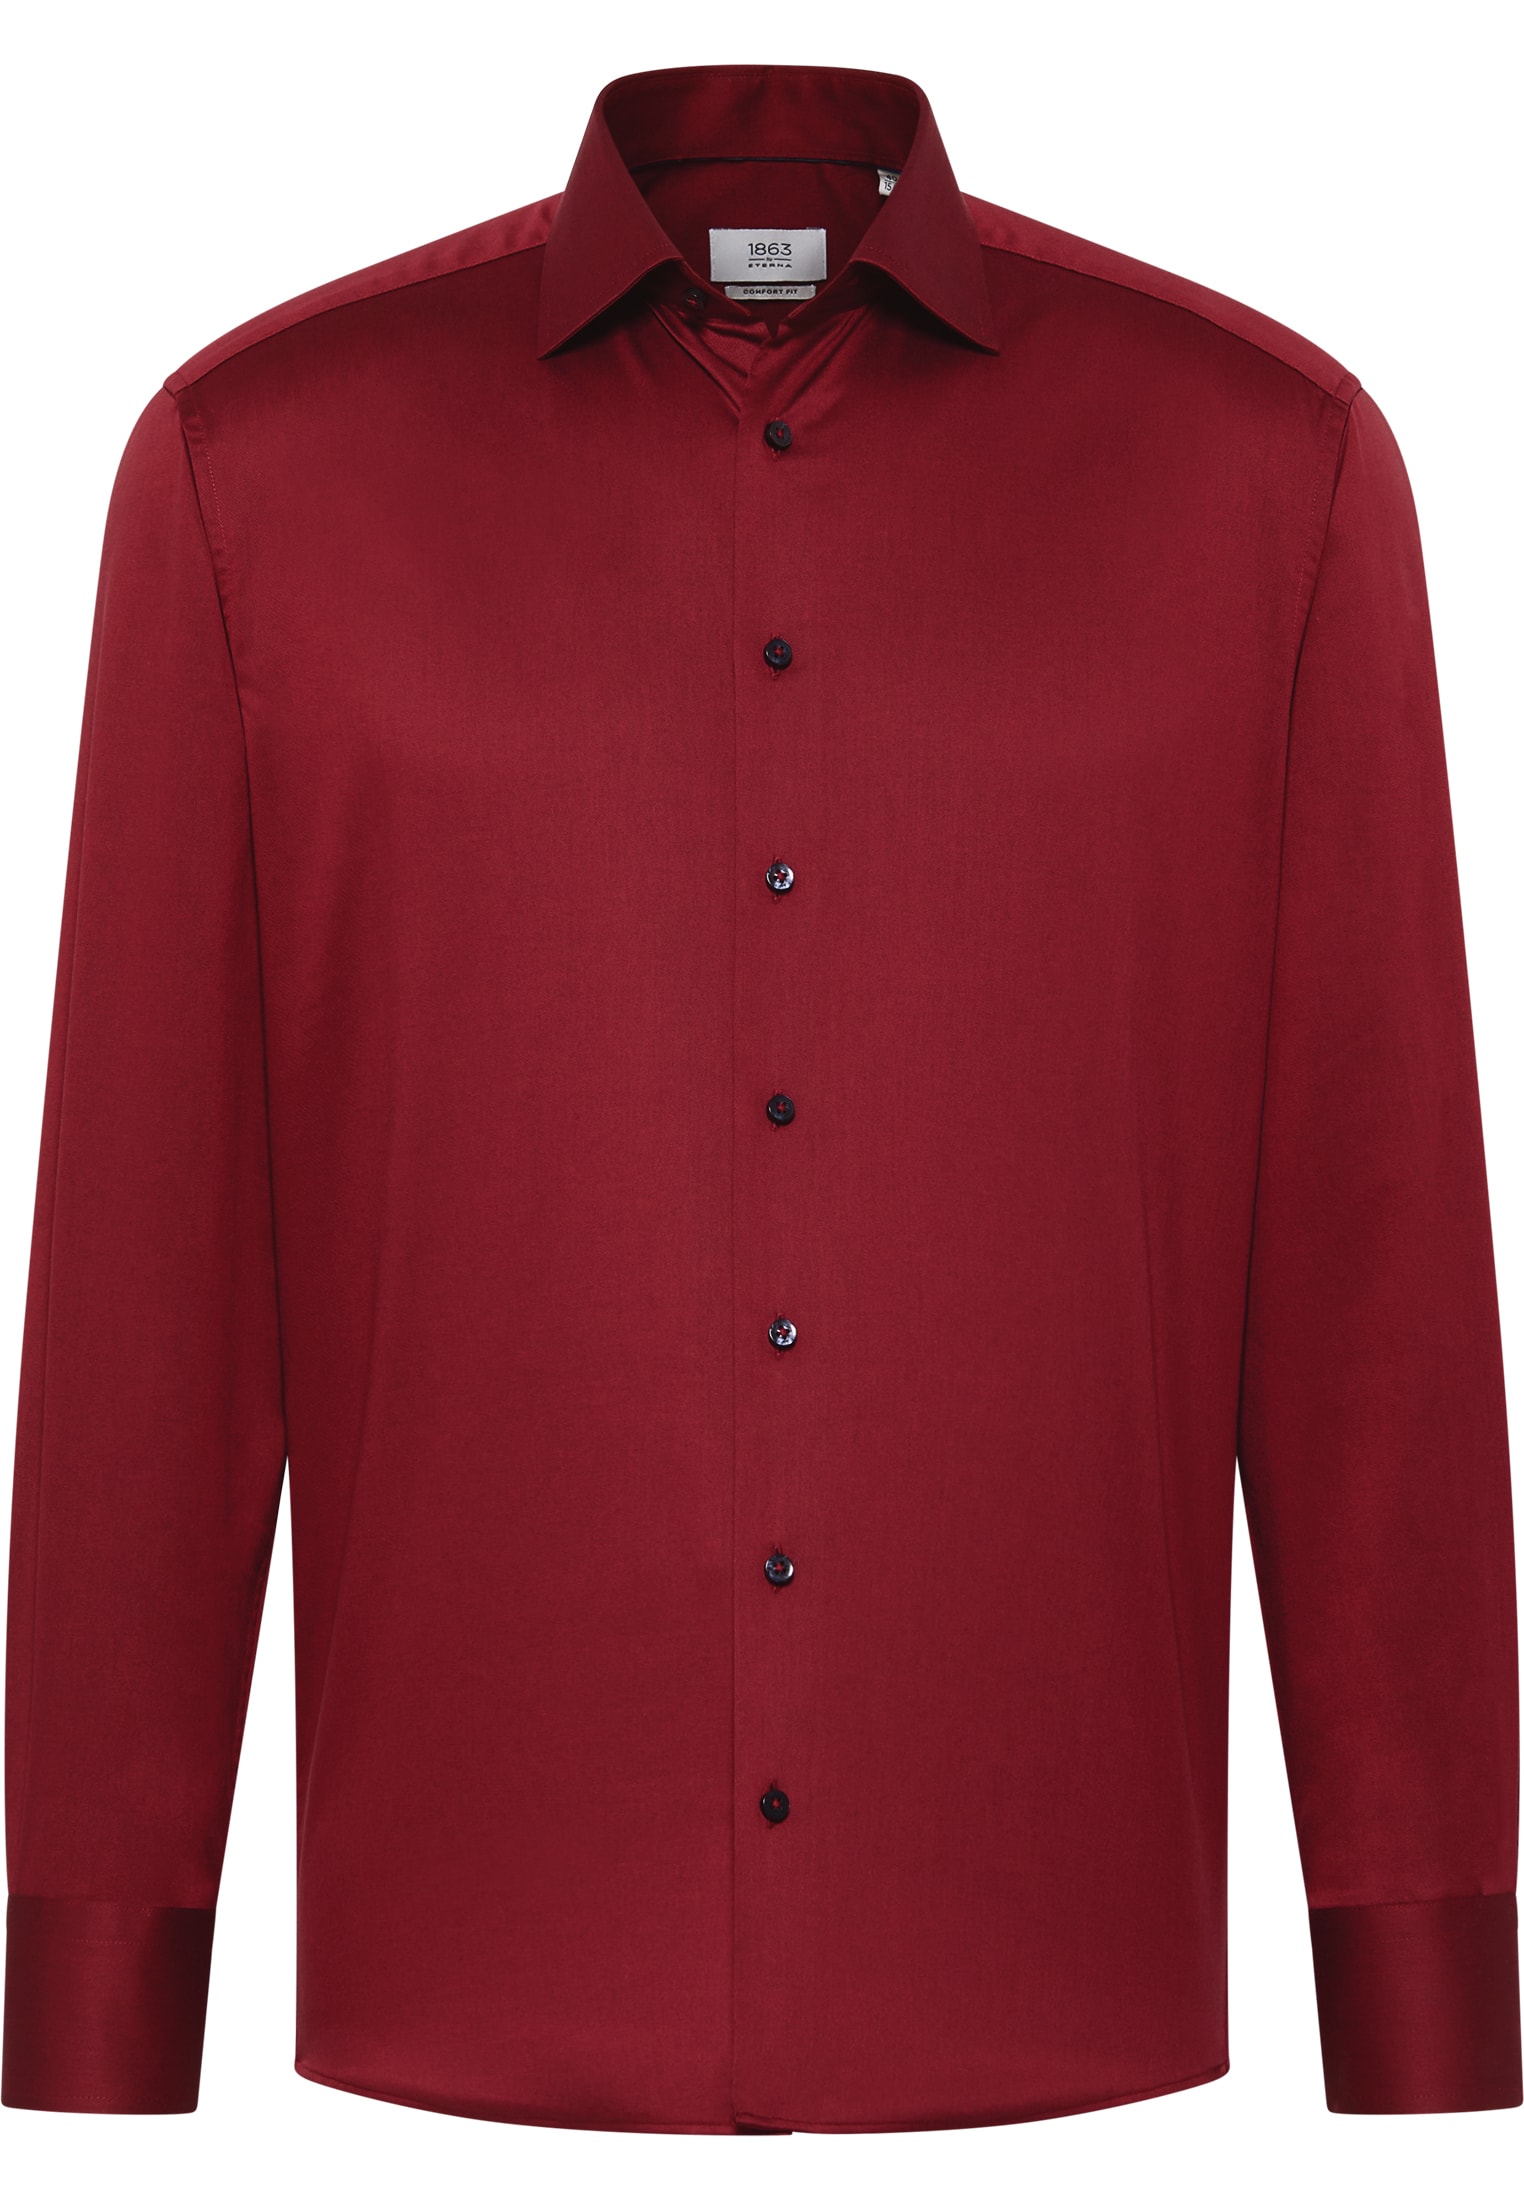 COMFORT FIT Luxury Shirt in ruby plain